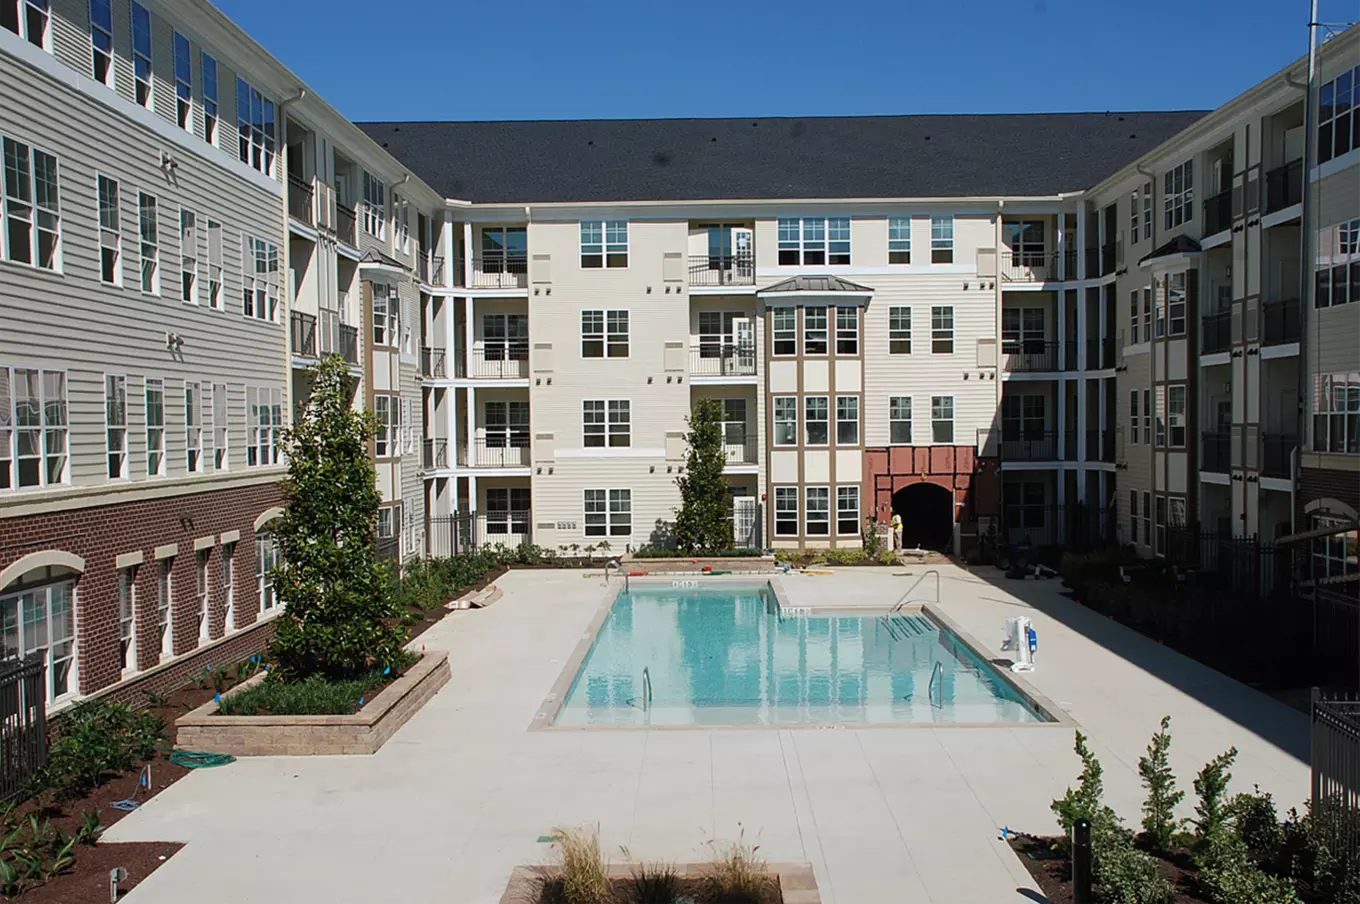 Multifamily housing photo of condos with pool